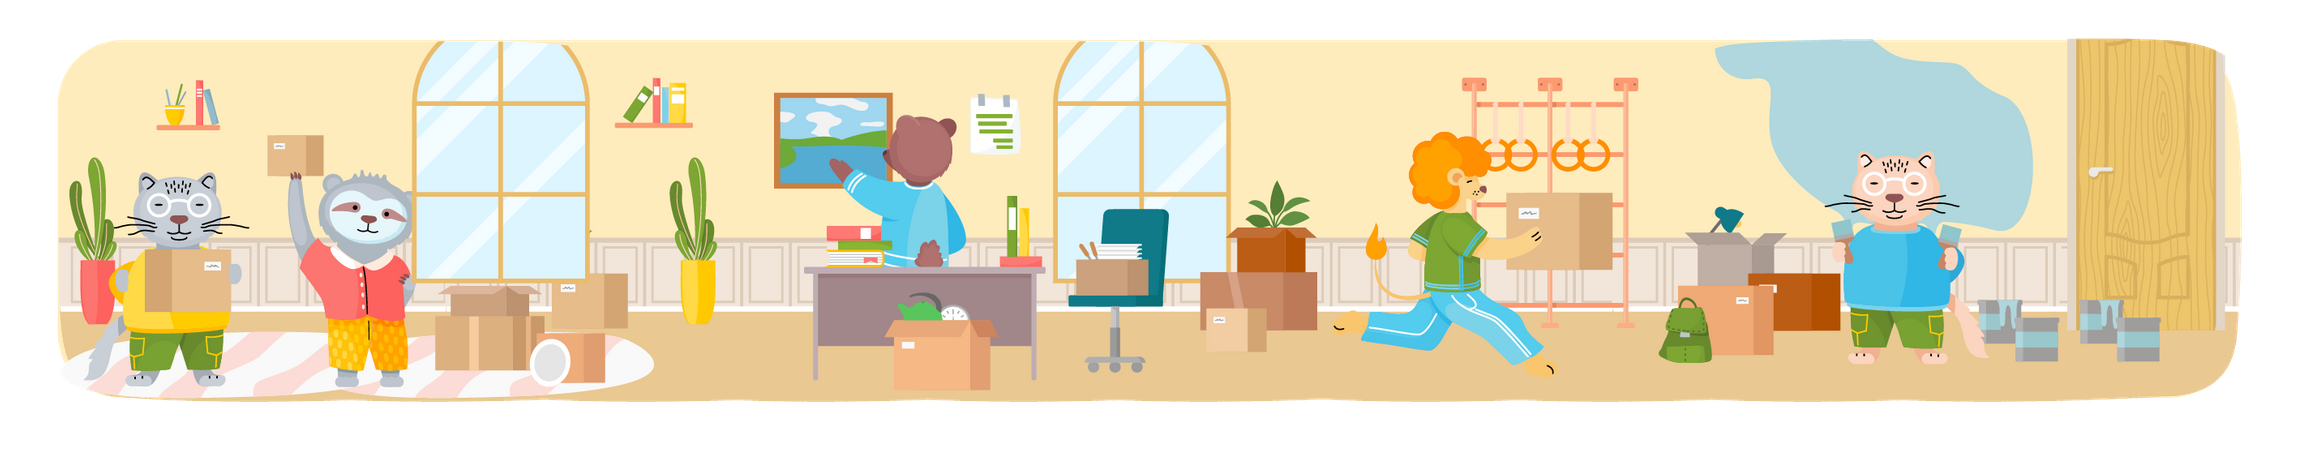 Wild and domestic animal moving to new house with things Illustration